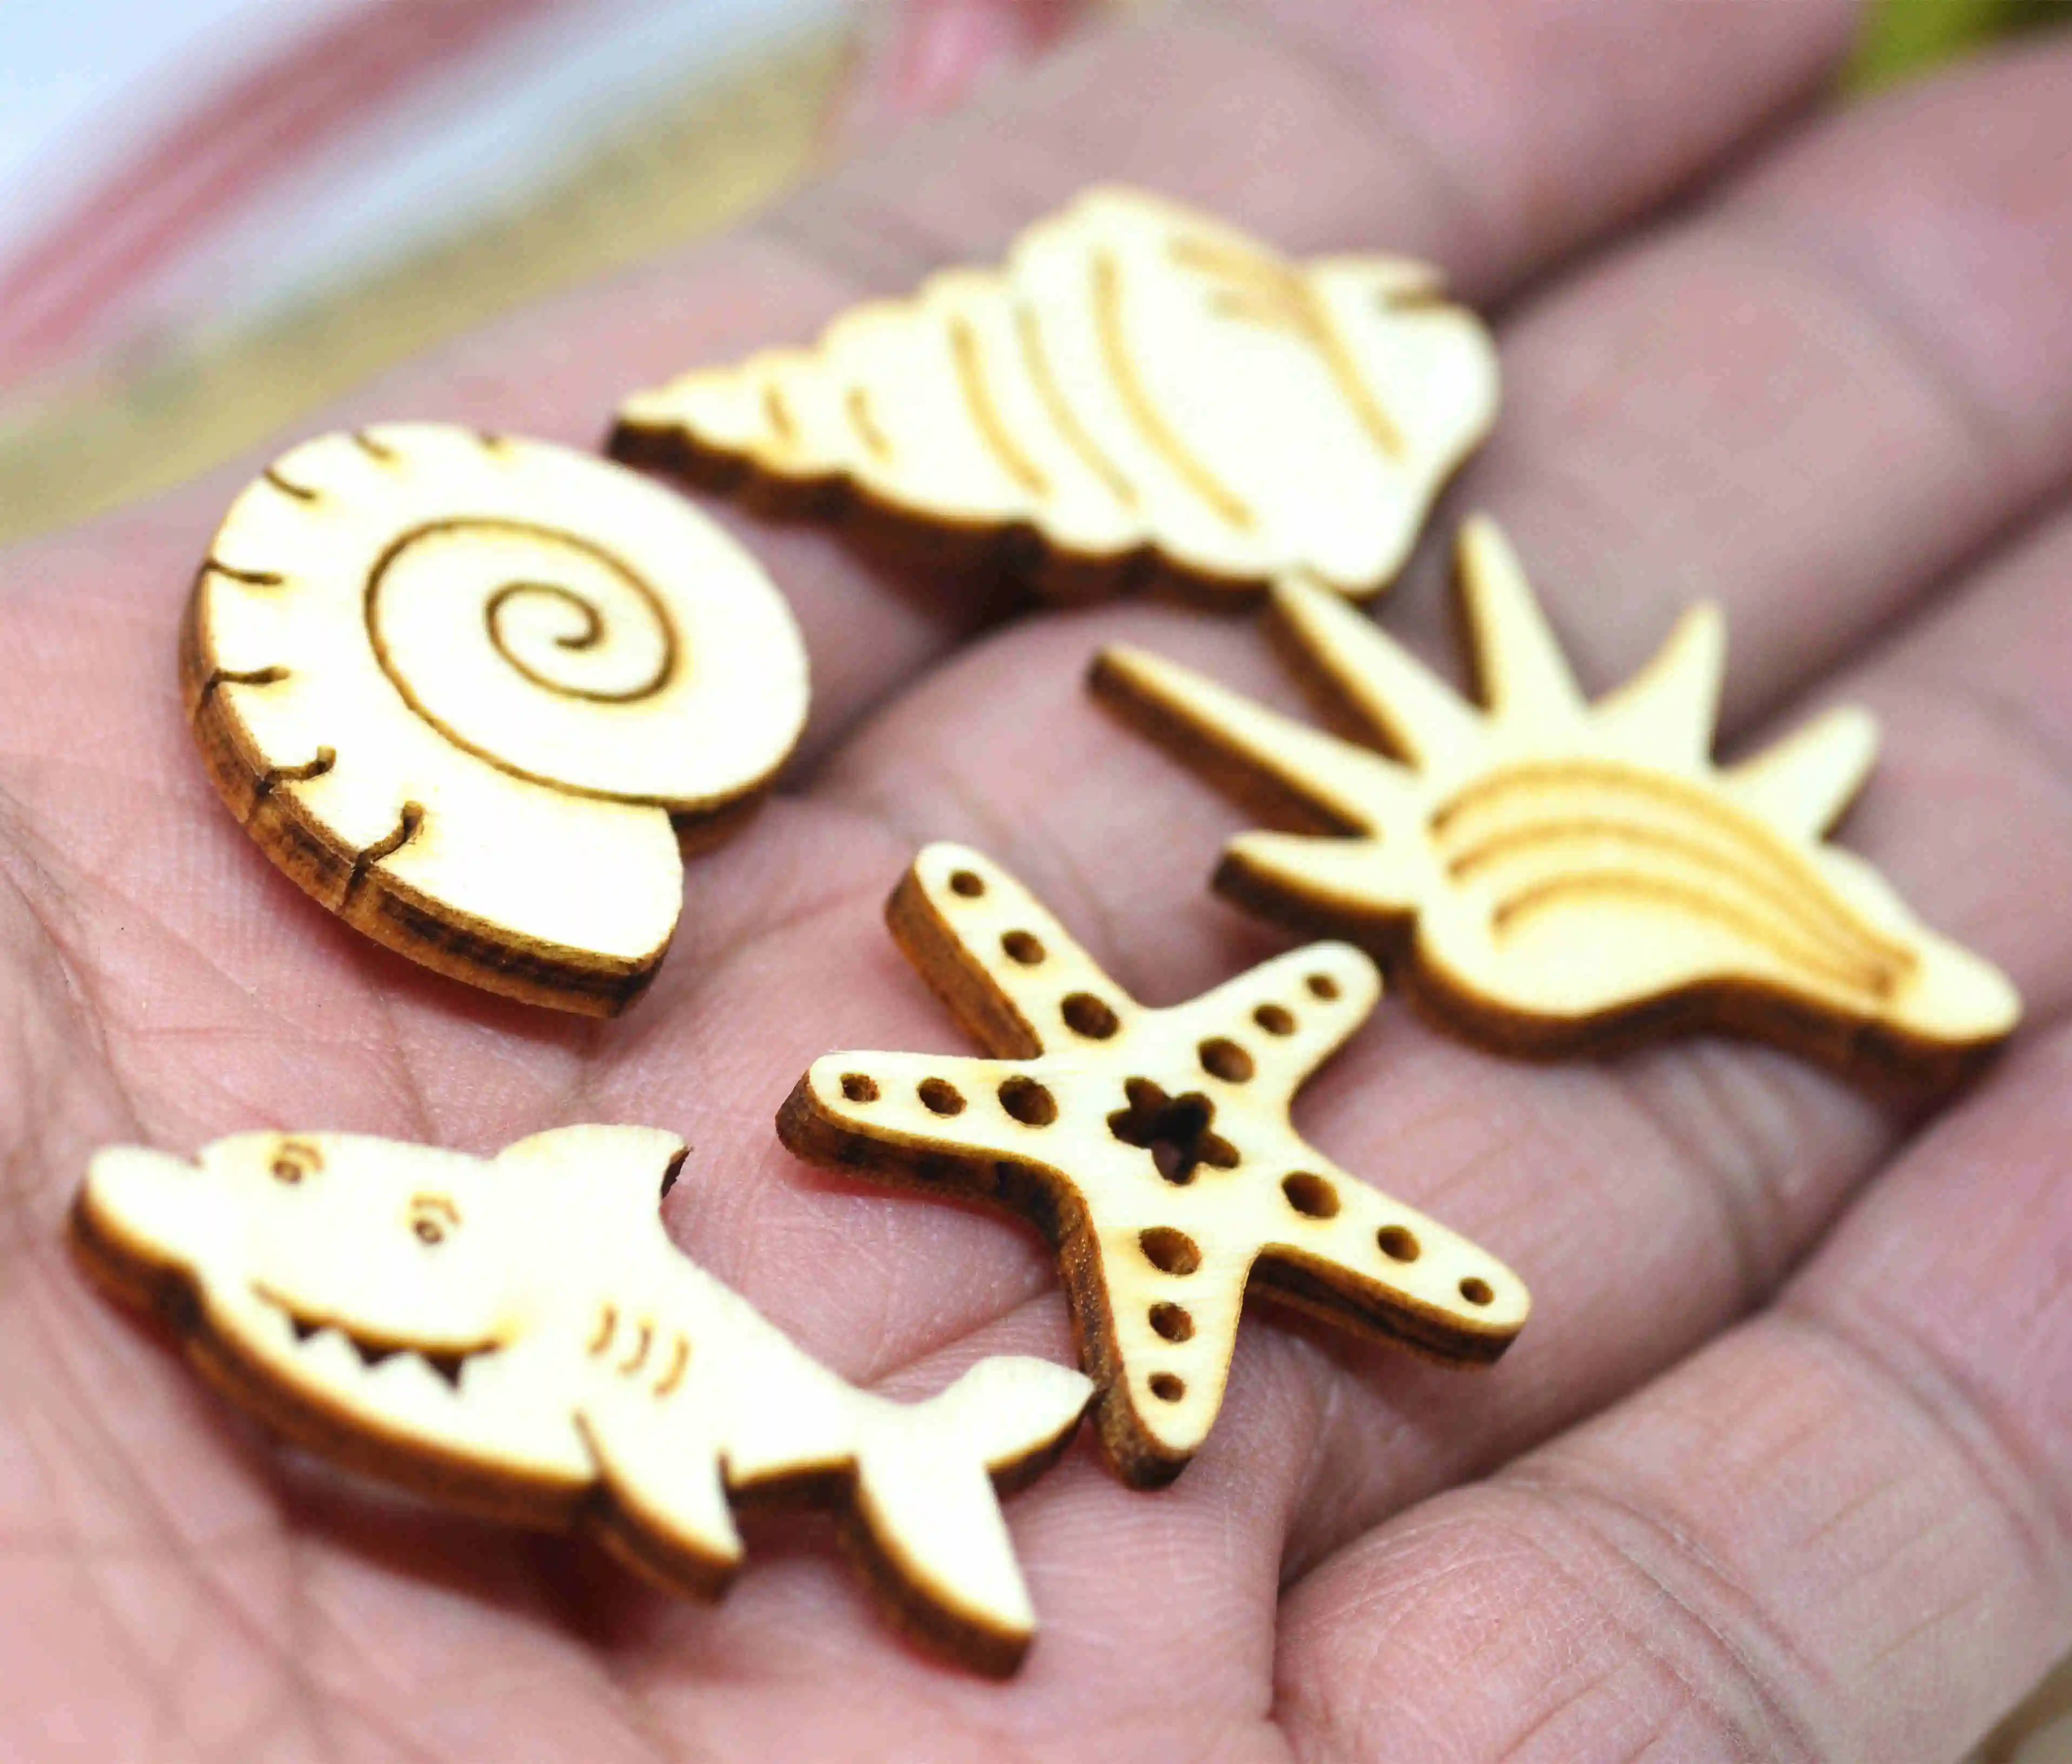 20pcs Mixed Laser Cutting Conch,Shark,Sea Star DIY Crafting Embellishments,Home Scrapbooking Charms images - 6